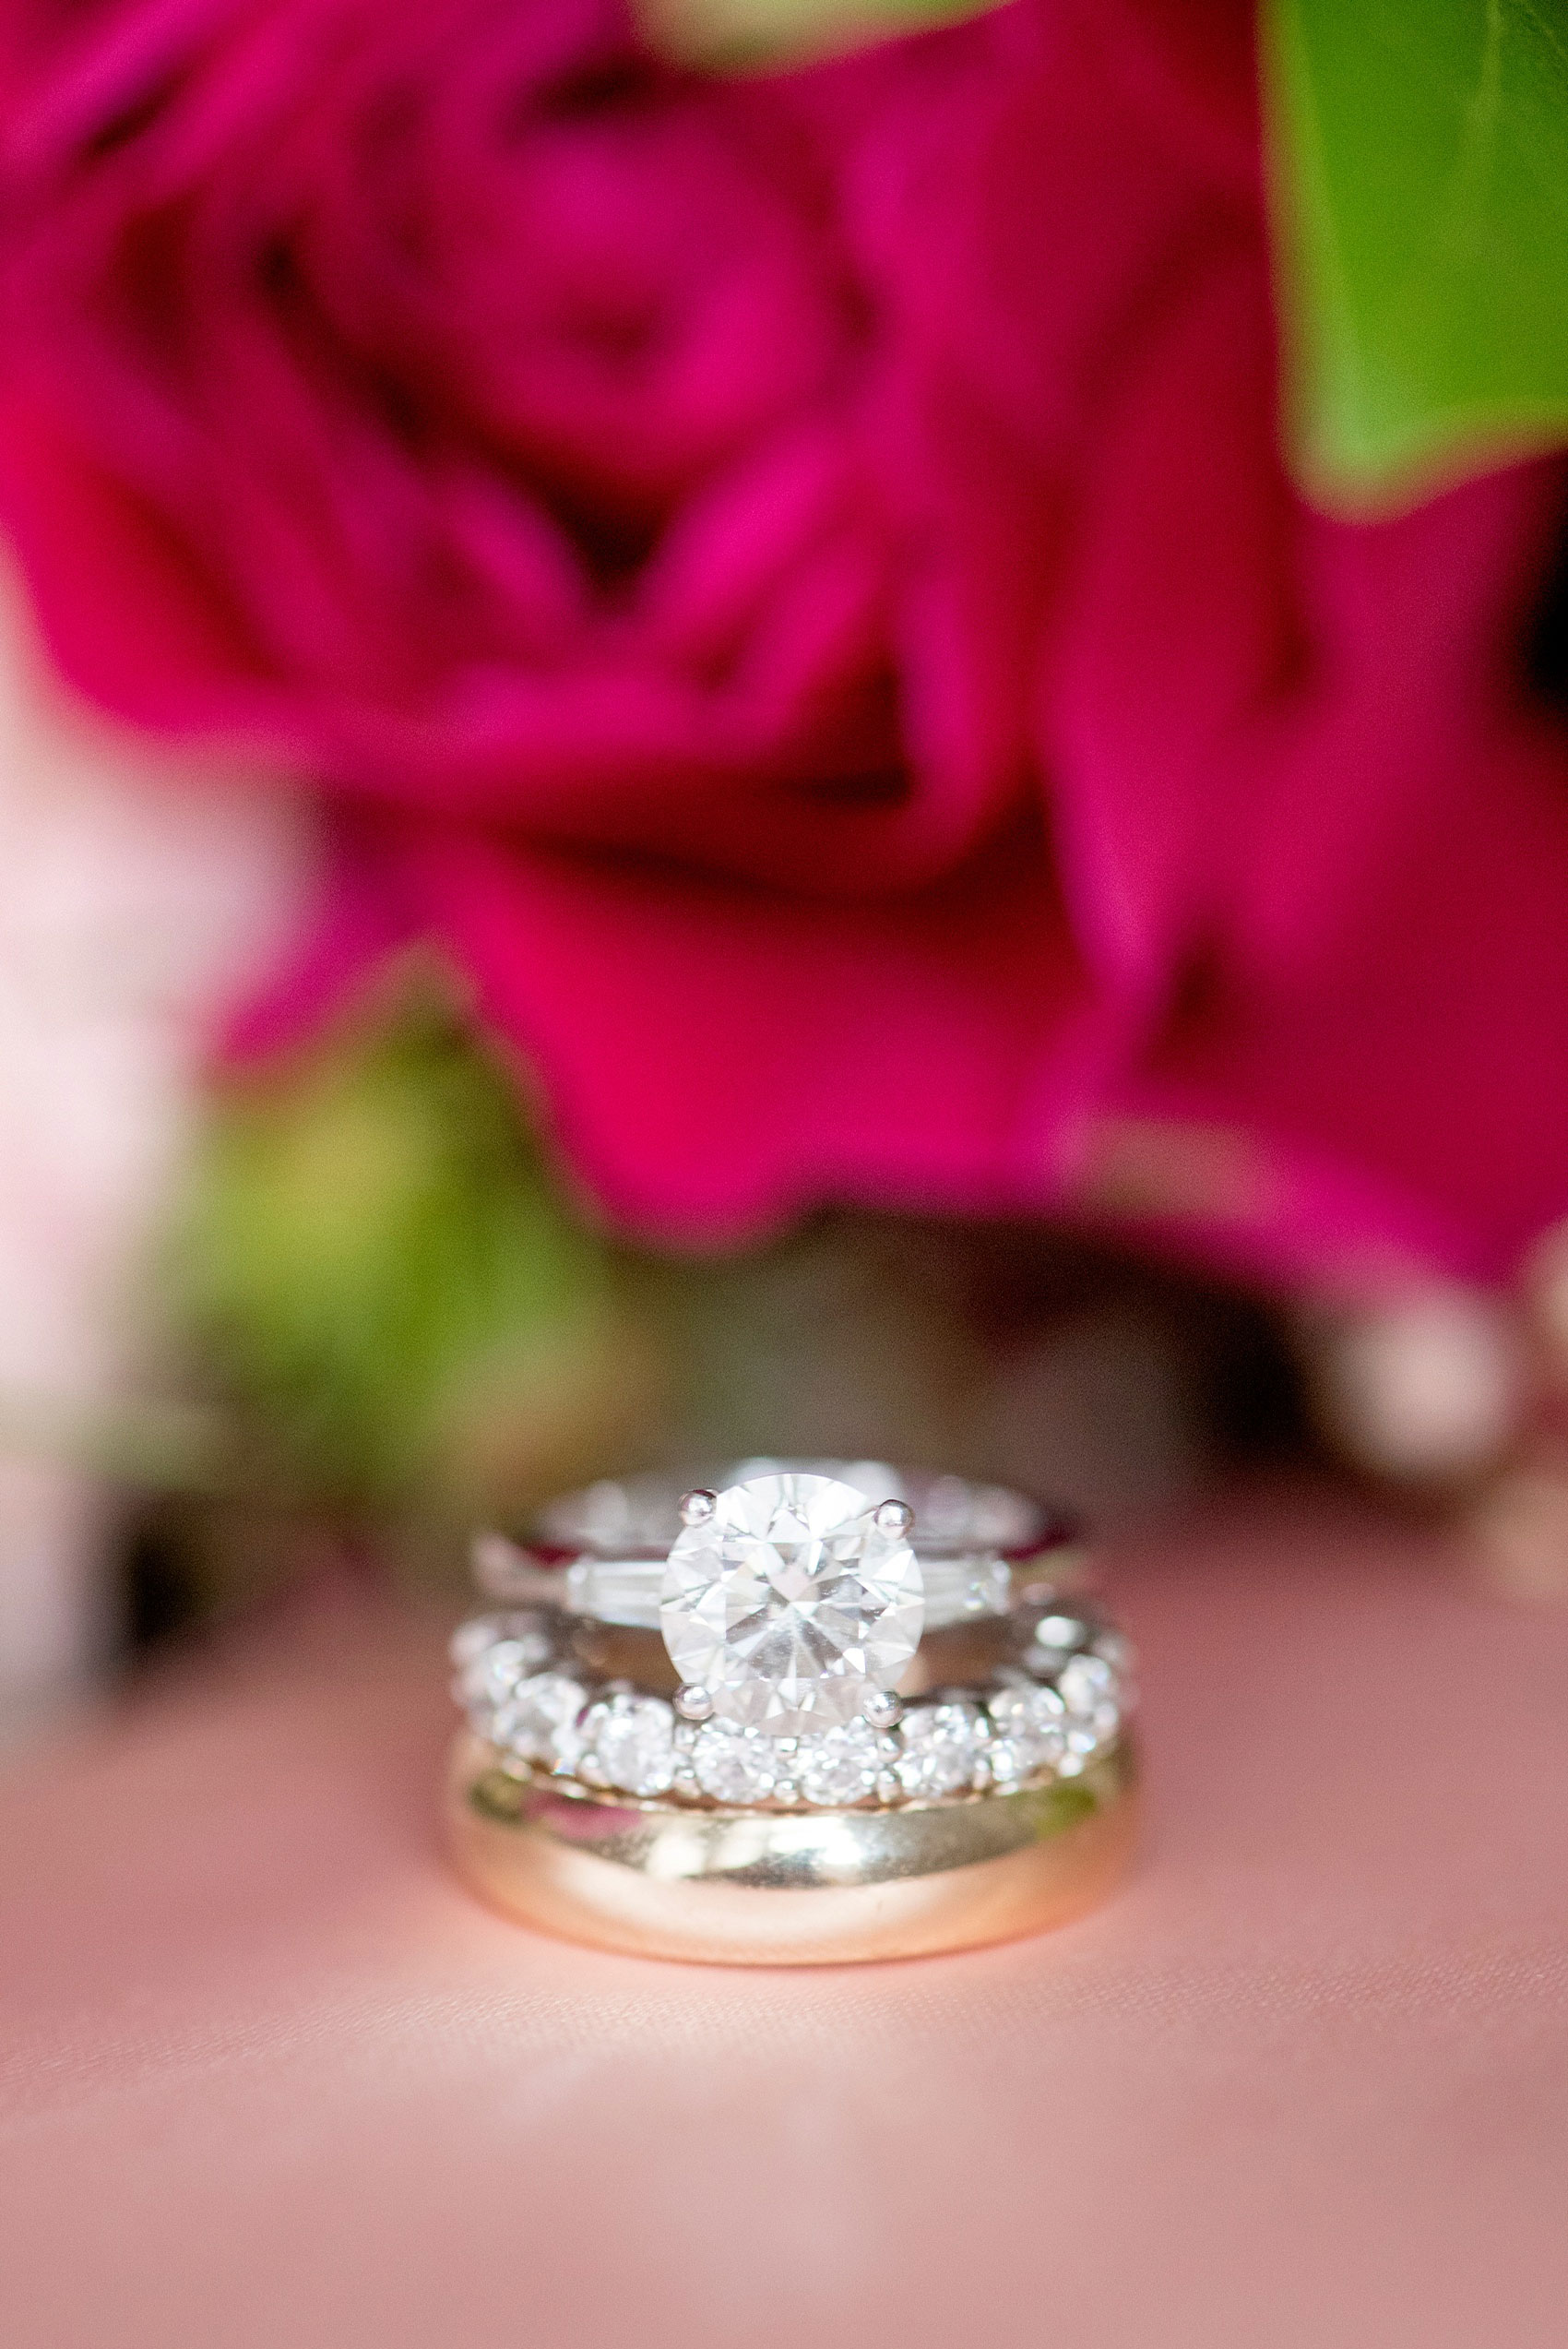 Mikkel Paige Photography photos from a wedding at Prospect Park Boathouse in Brooklyn, NY. Image of the bride and groom's diamond and gold wedding rings.